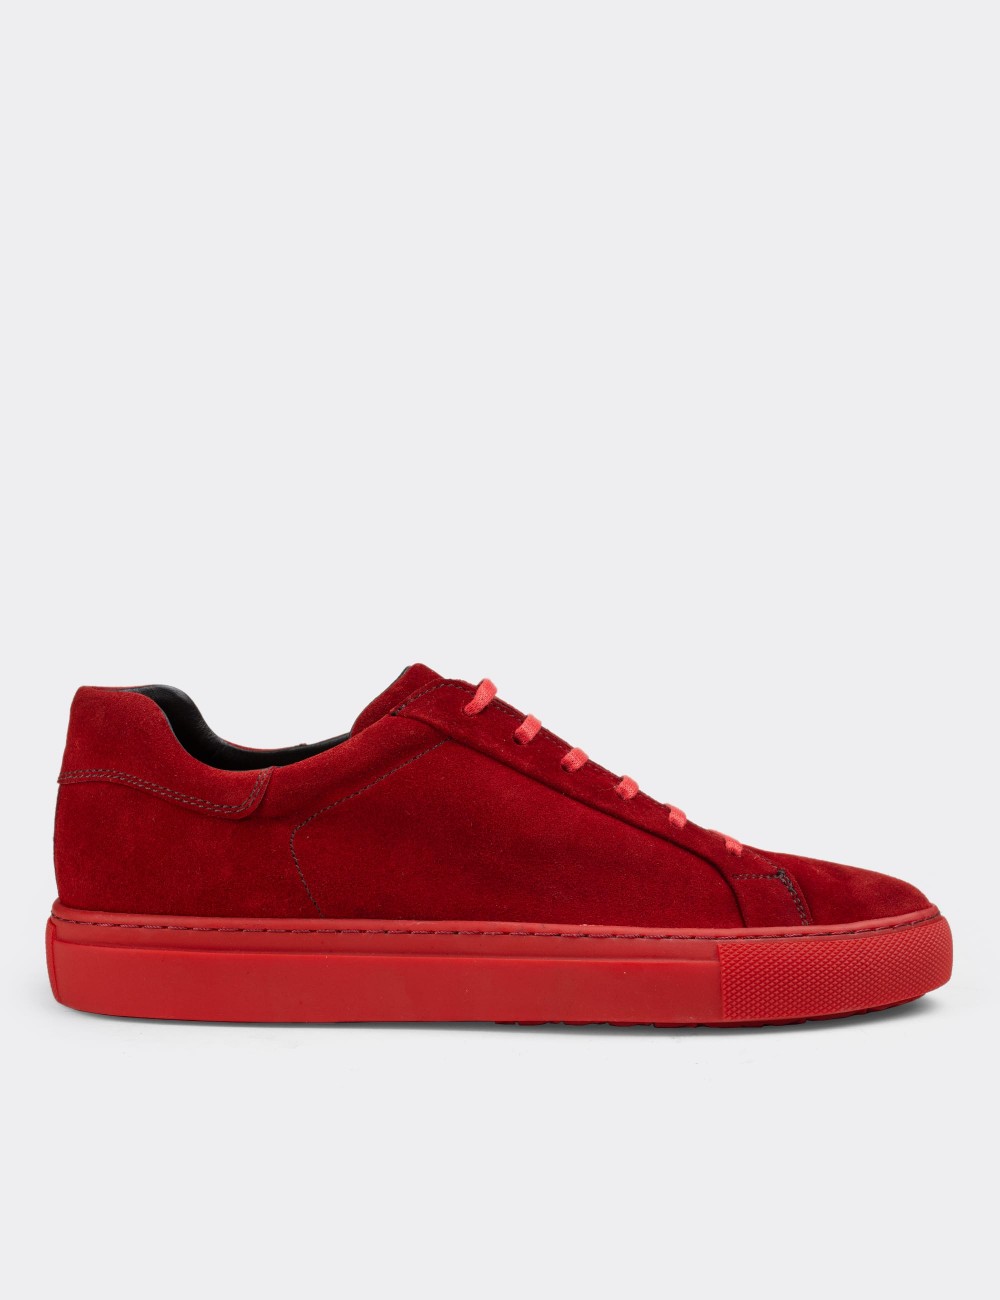 Red Suede Leather Sneakers - 01829MKRMC01